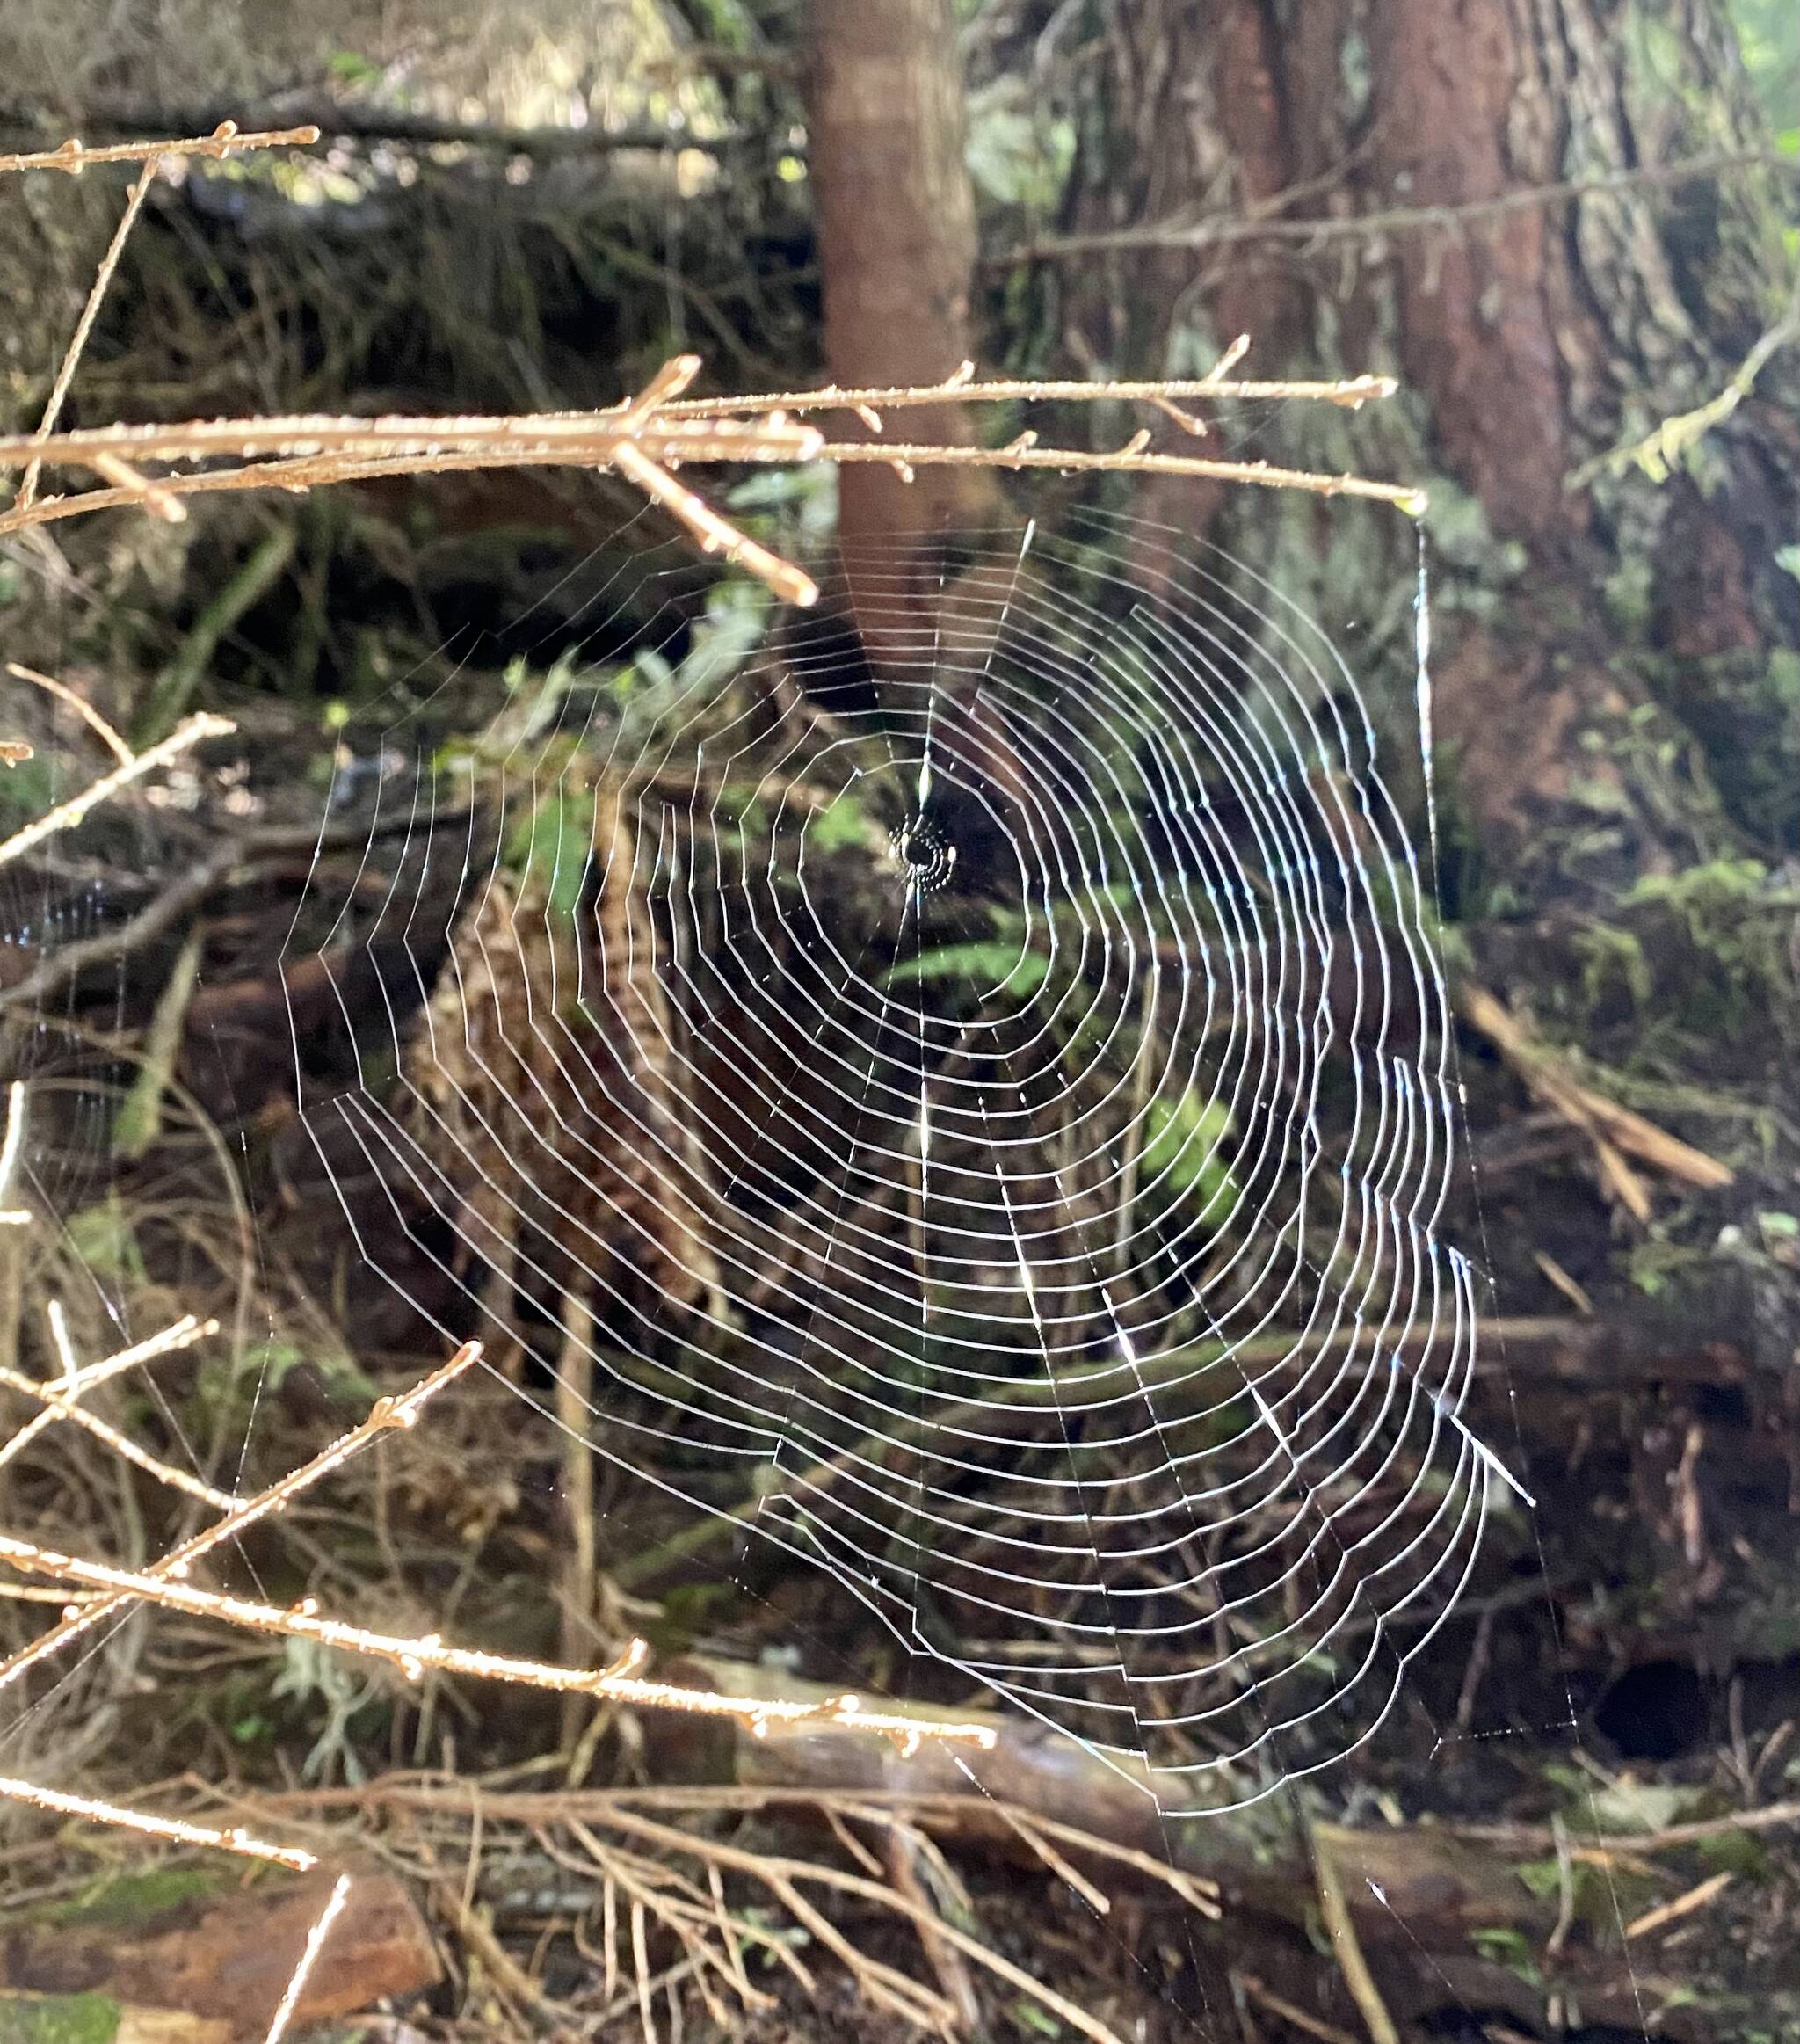 This photo shows a spider web in Craig on Oct. 17. (Courtesy Photo / Marti Crutcher)